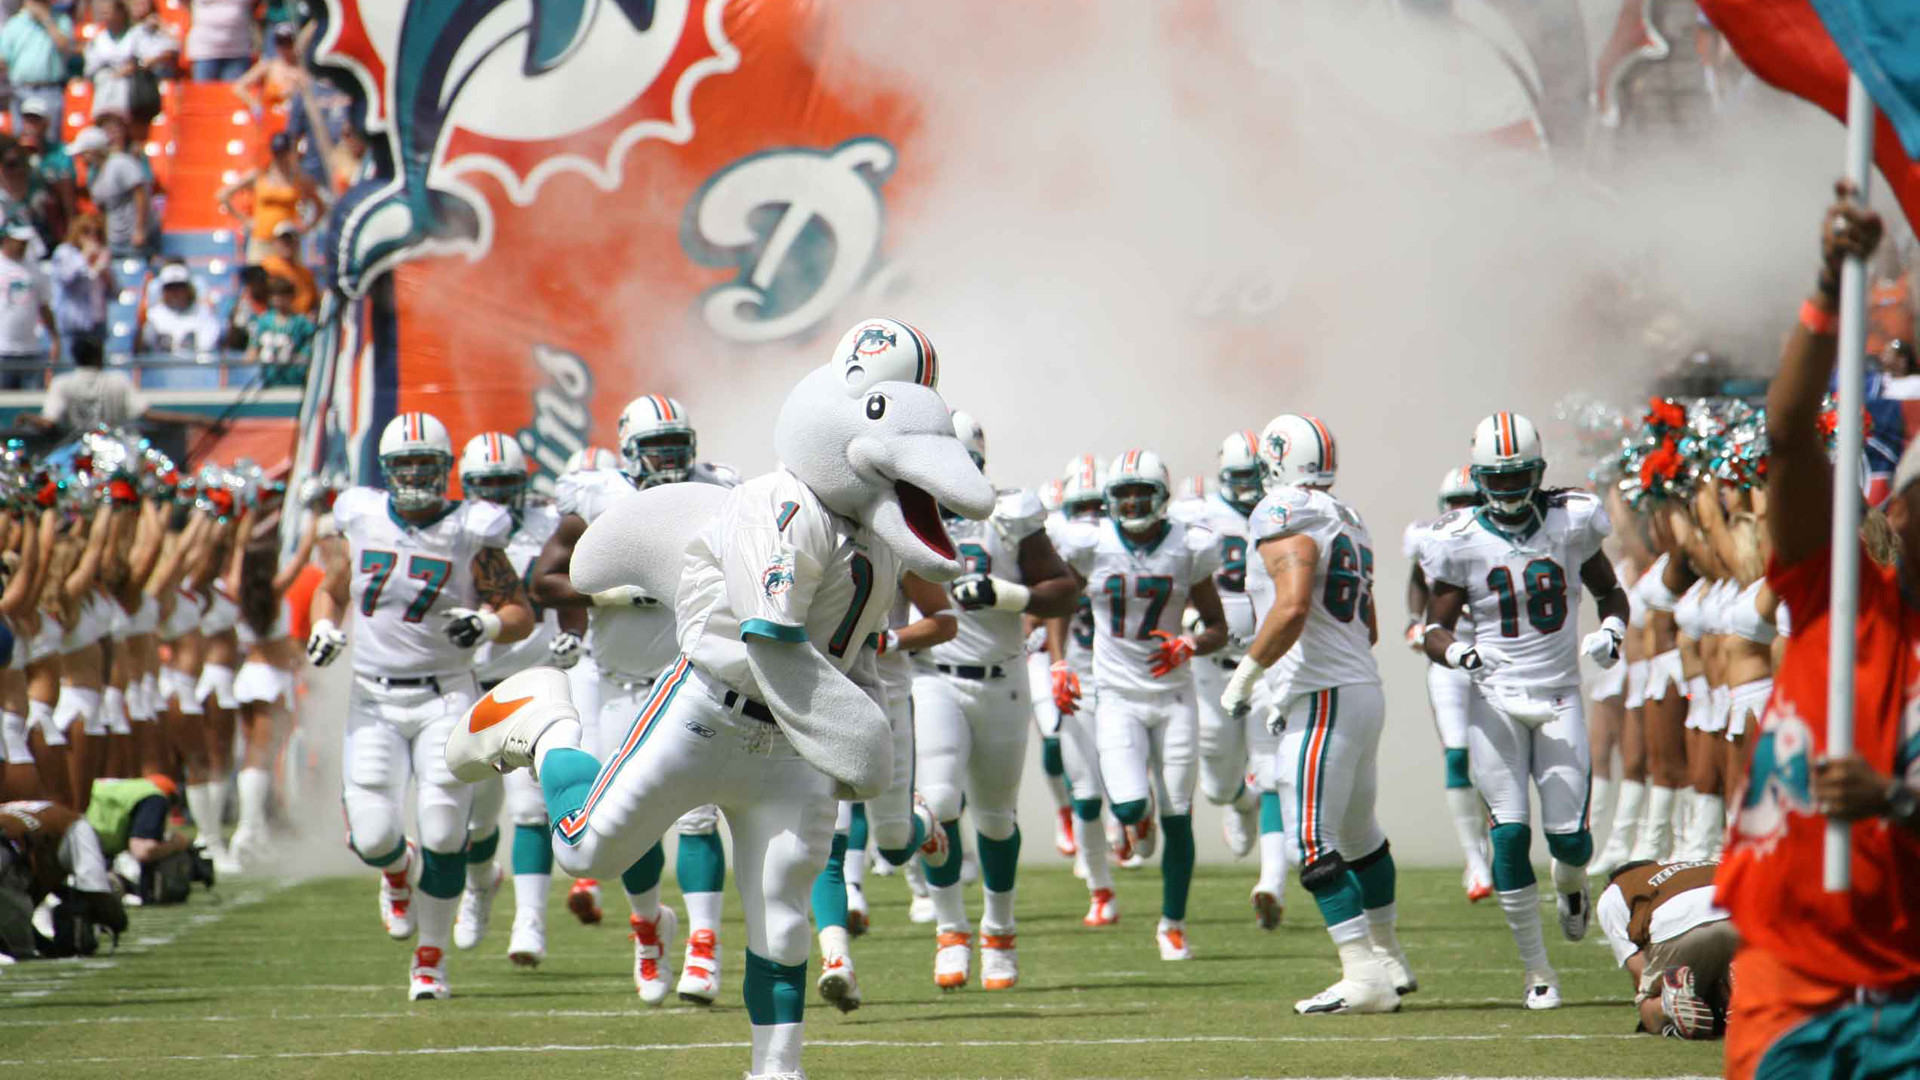 1920x1080 Miami Dolphins Wallpapers